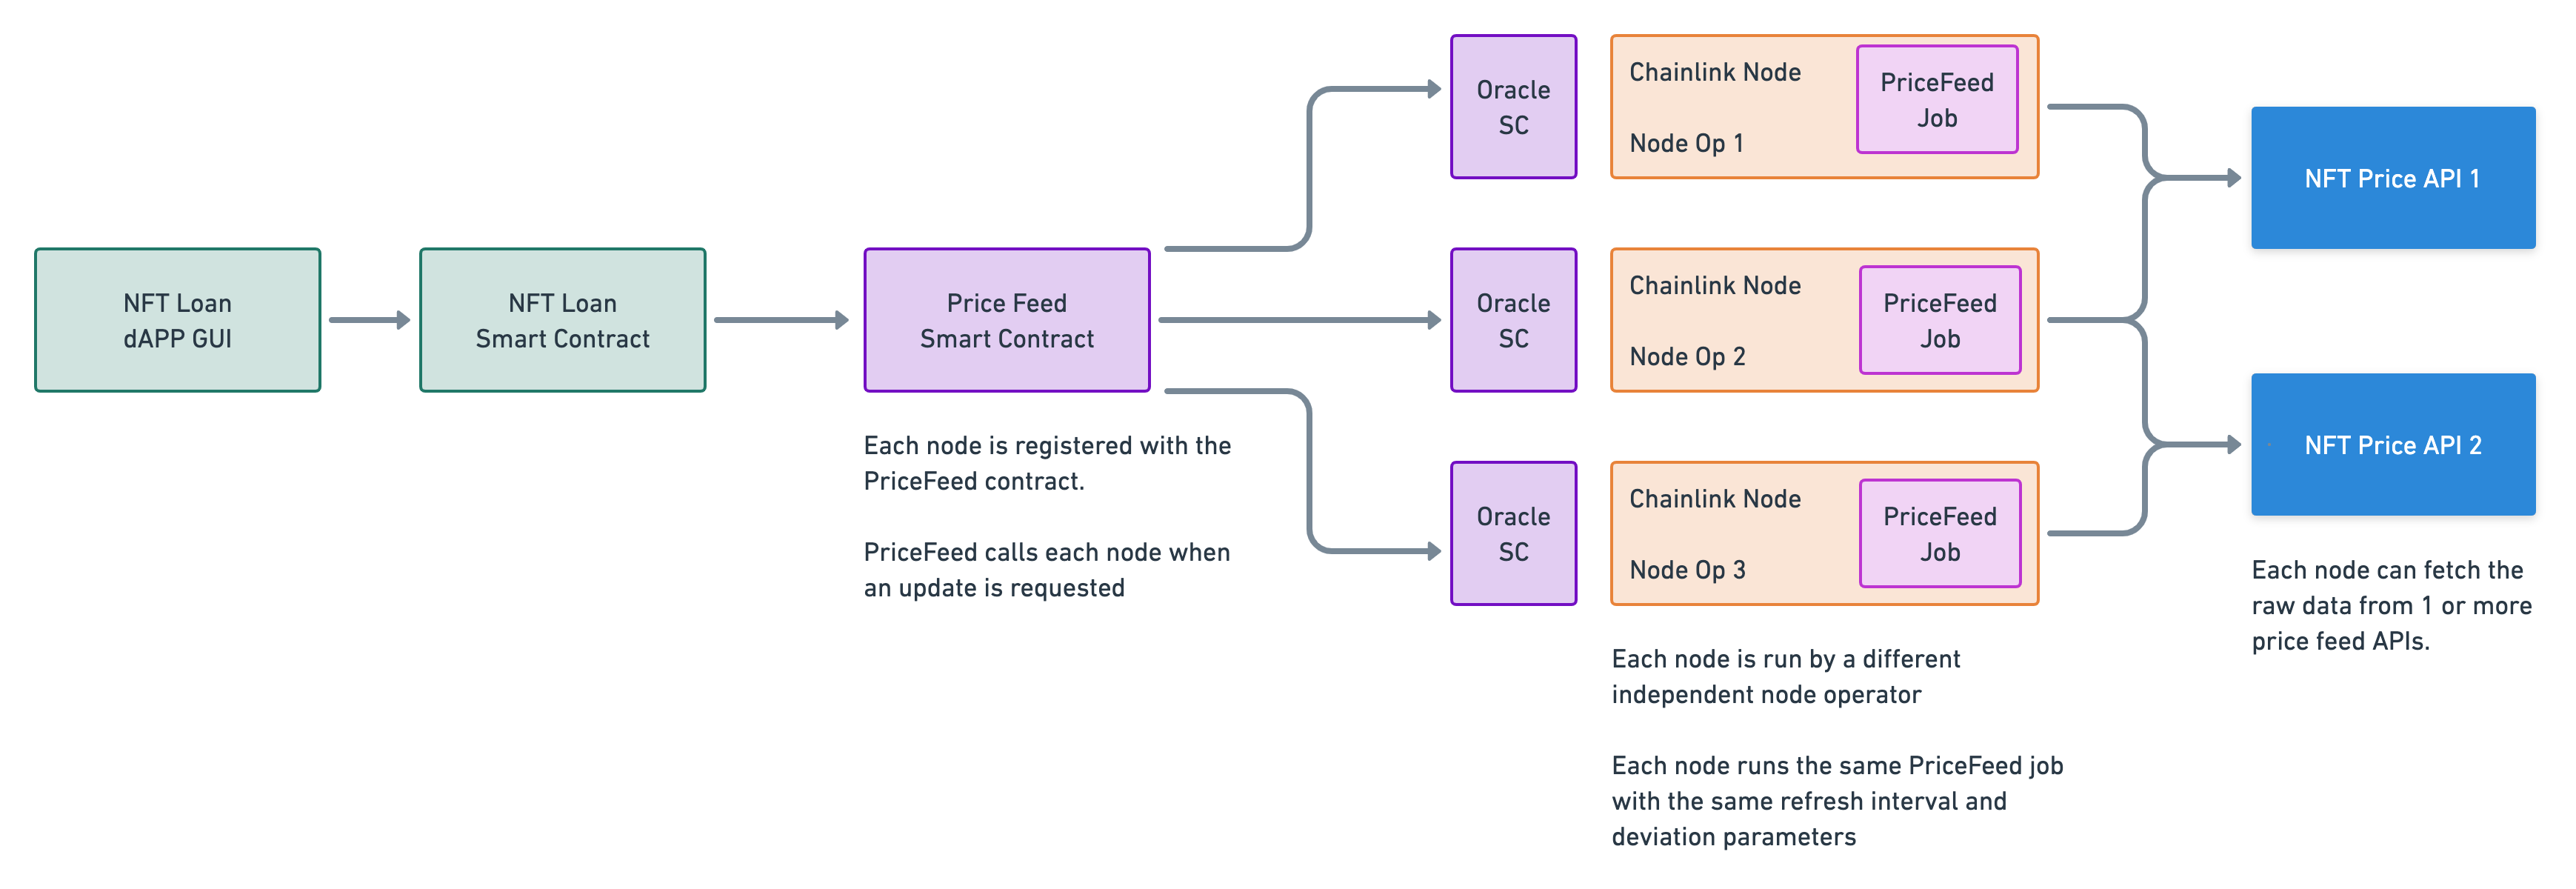 Ad-hoc price feed using multiple nodes to form a DON.